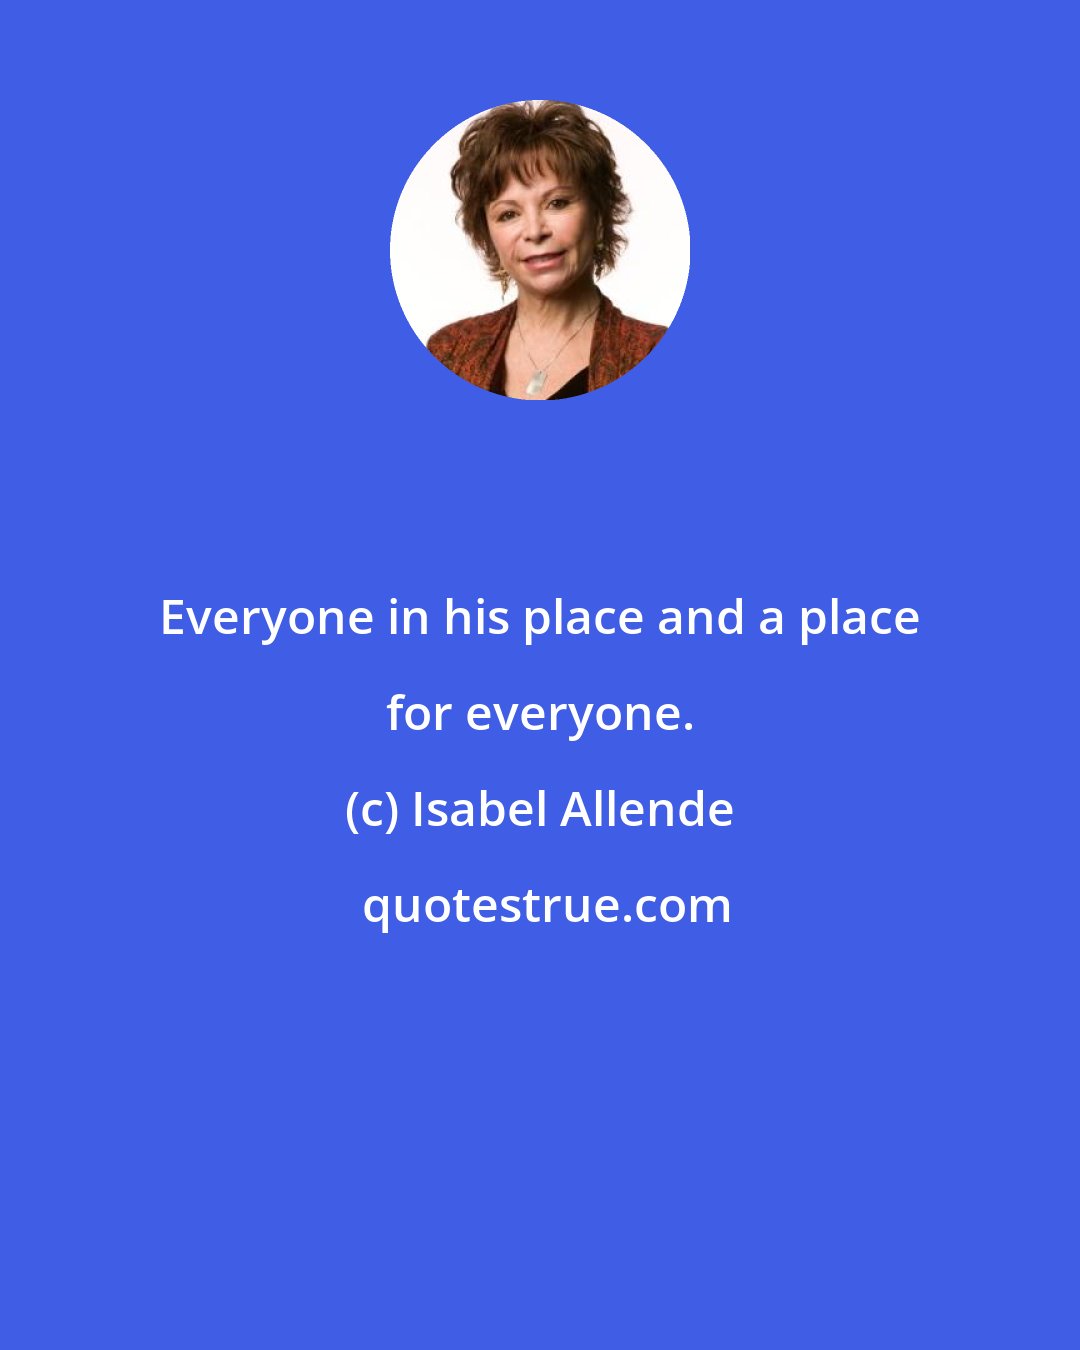 Isabel Allende: Everyone in his place and a place for everyone.